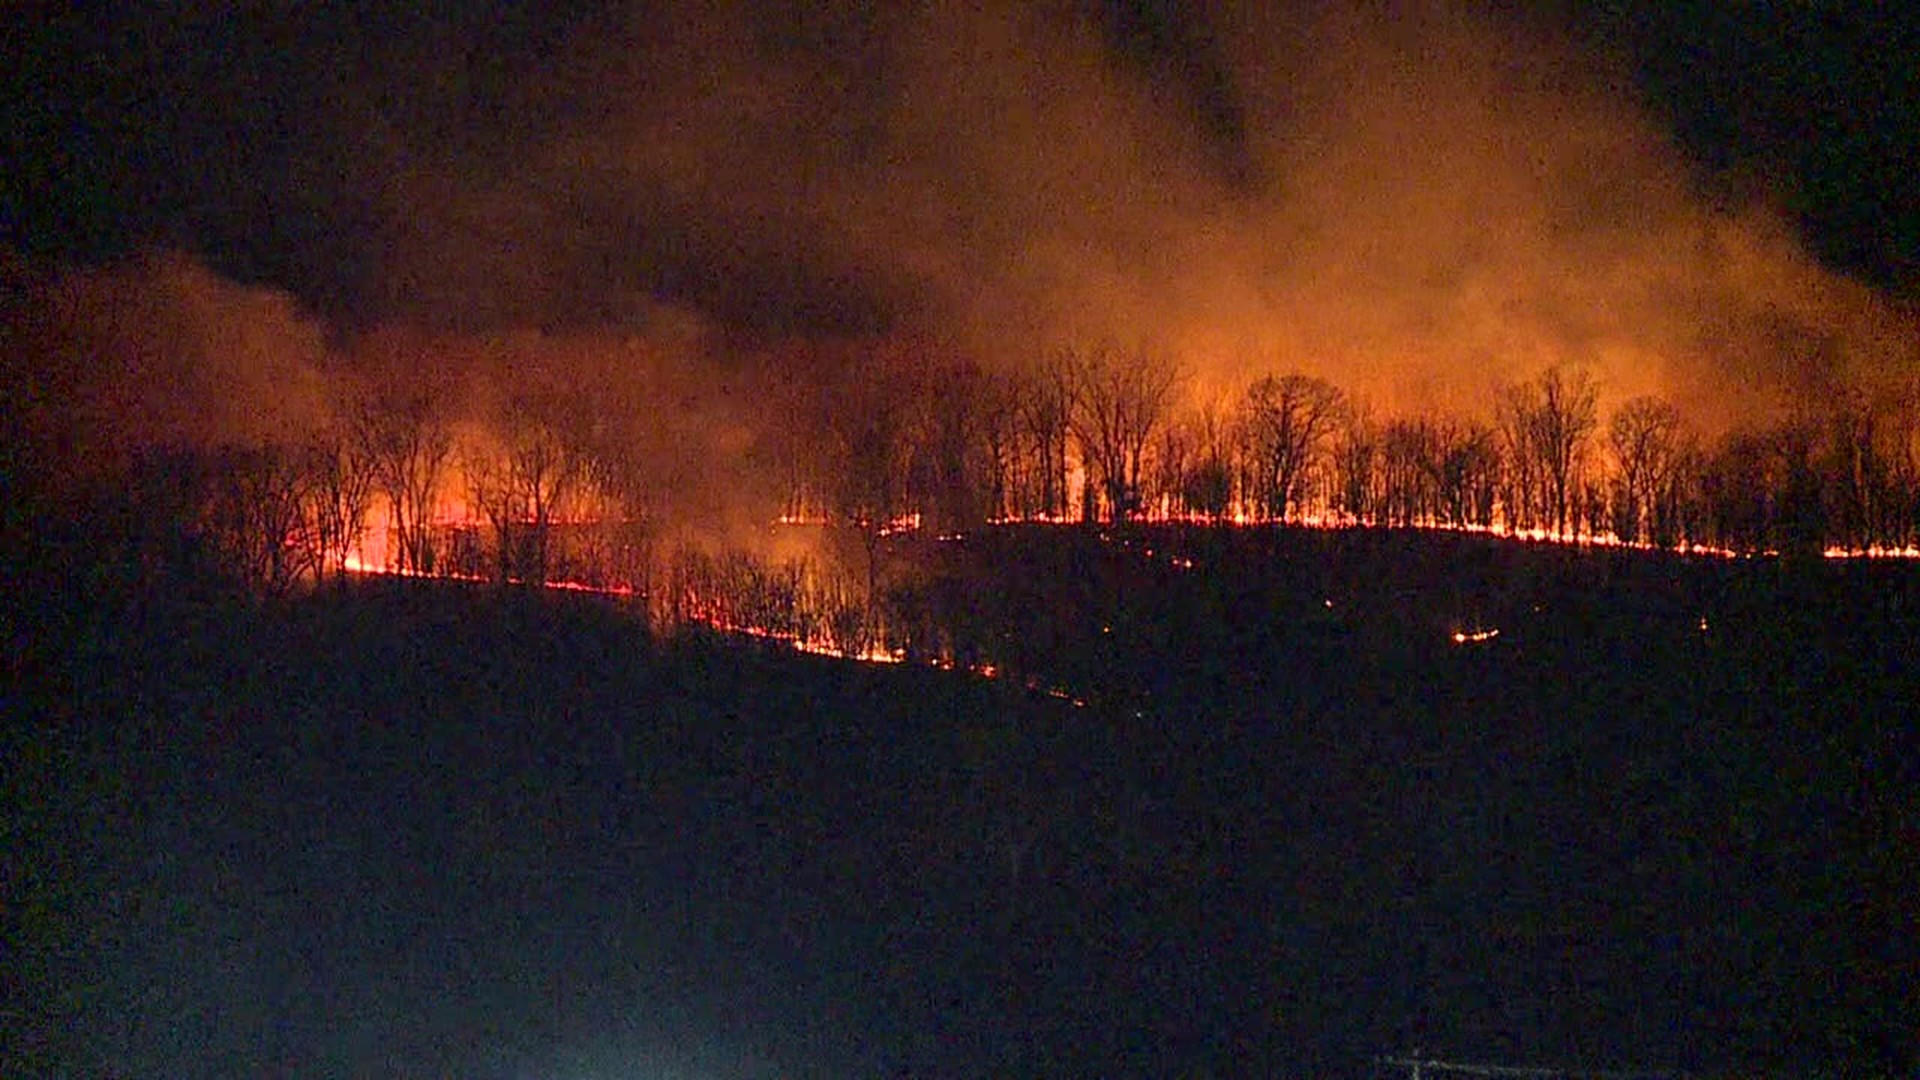 Newswatch 16's Jack Culkin spoke with fire crews in Susquehanna County, where a burn ban is in place.